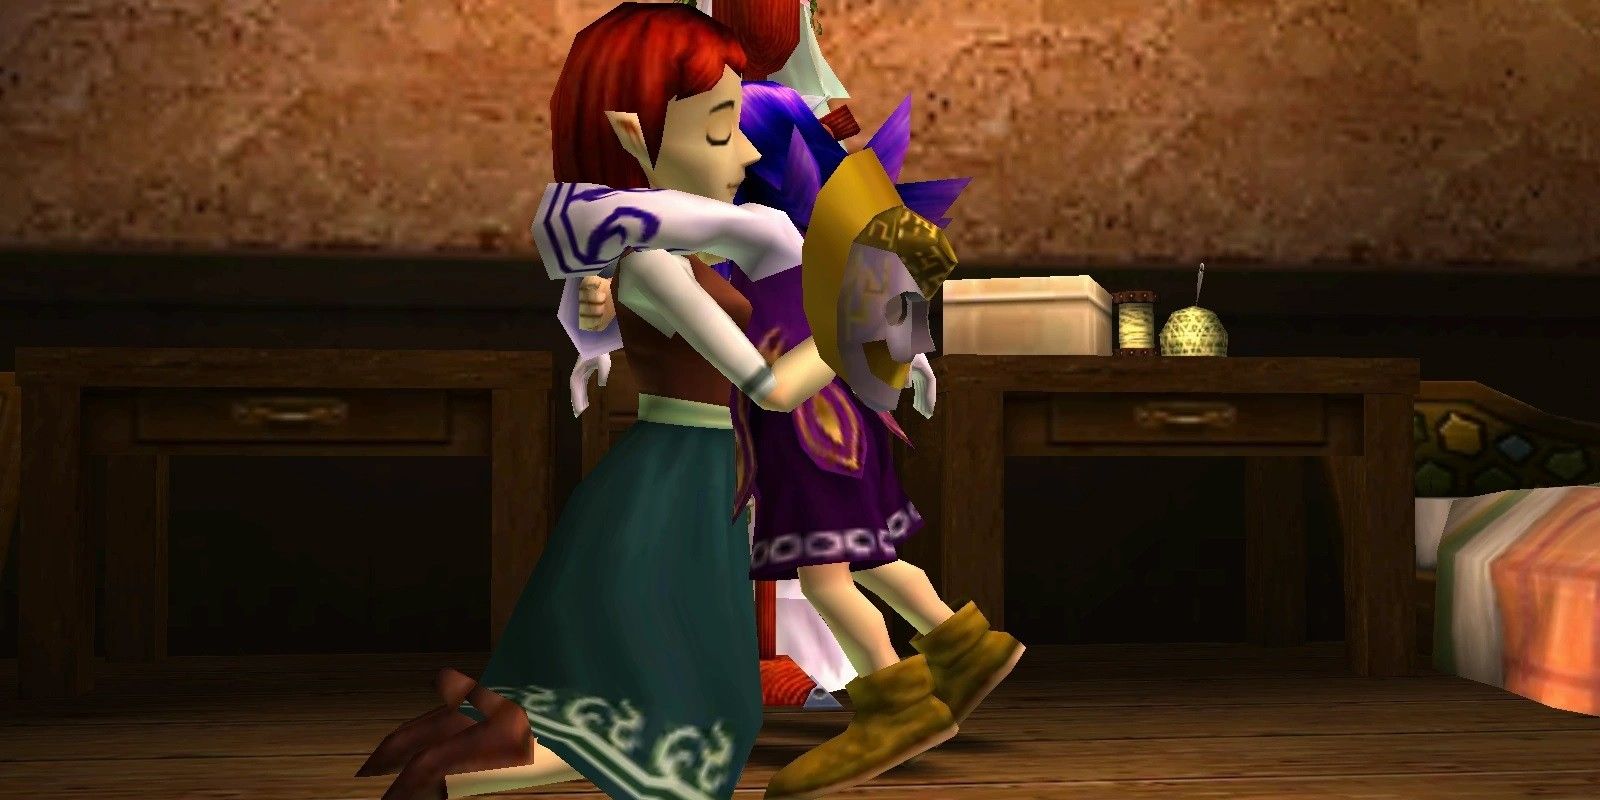 Kanfei and Anju embrace each other in Legend of Zelda: Majora's Mask